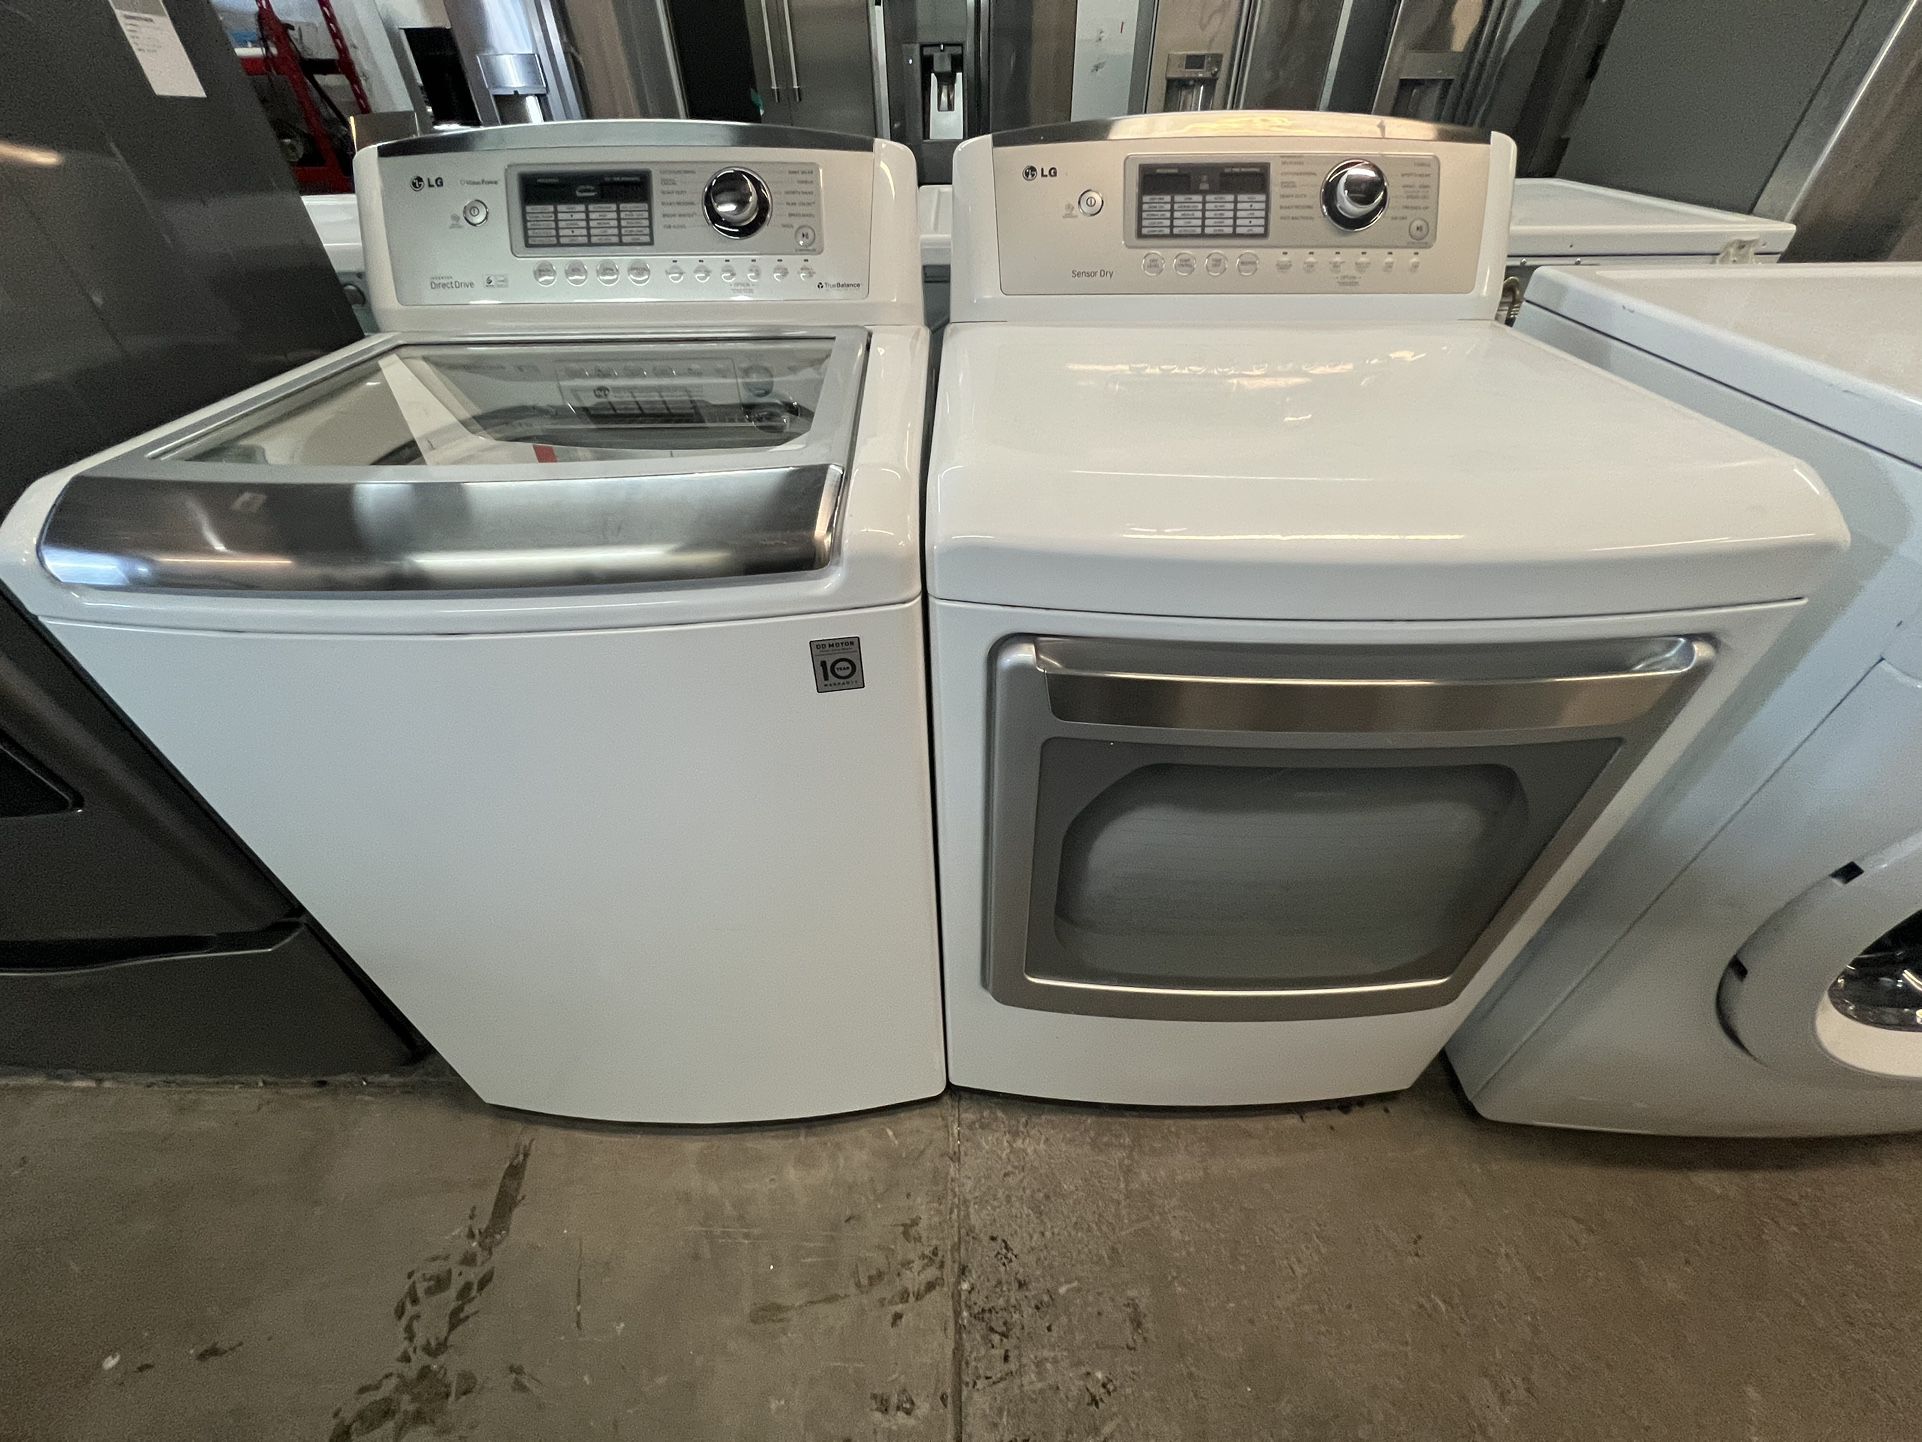 Lg Washer And Electric Dryer Set